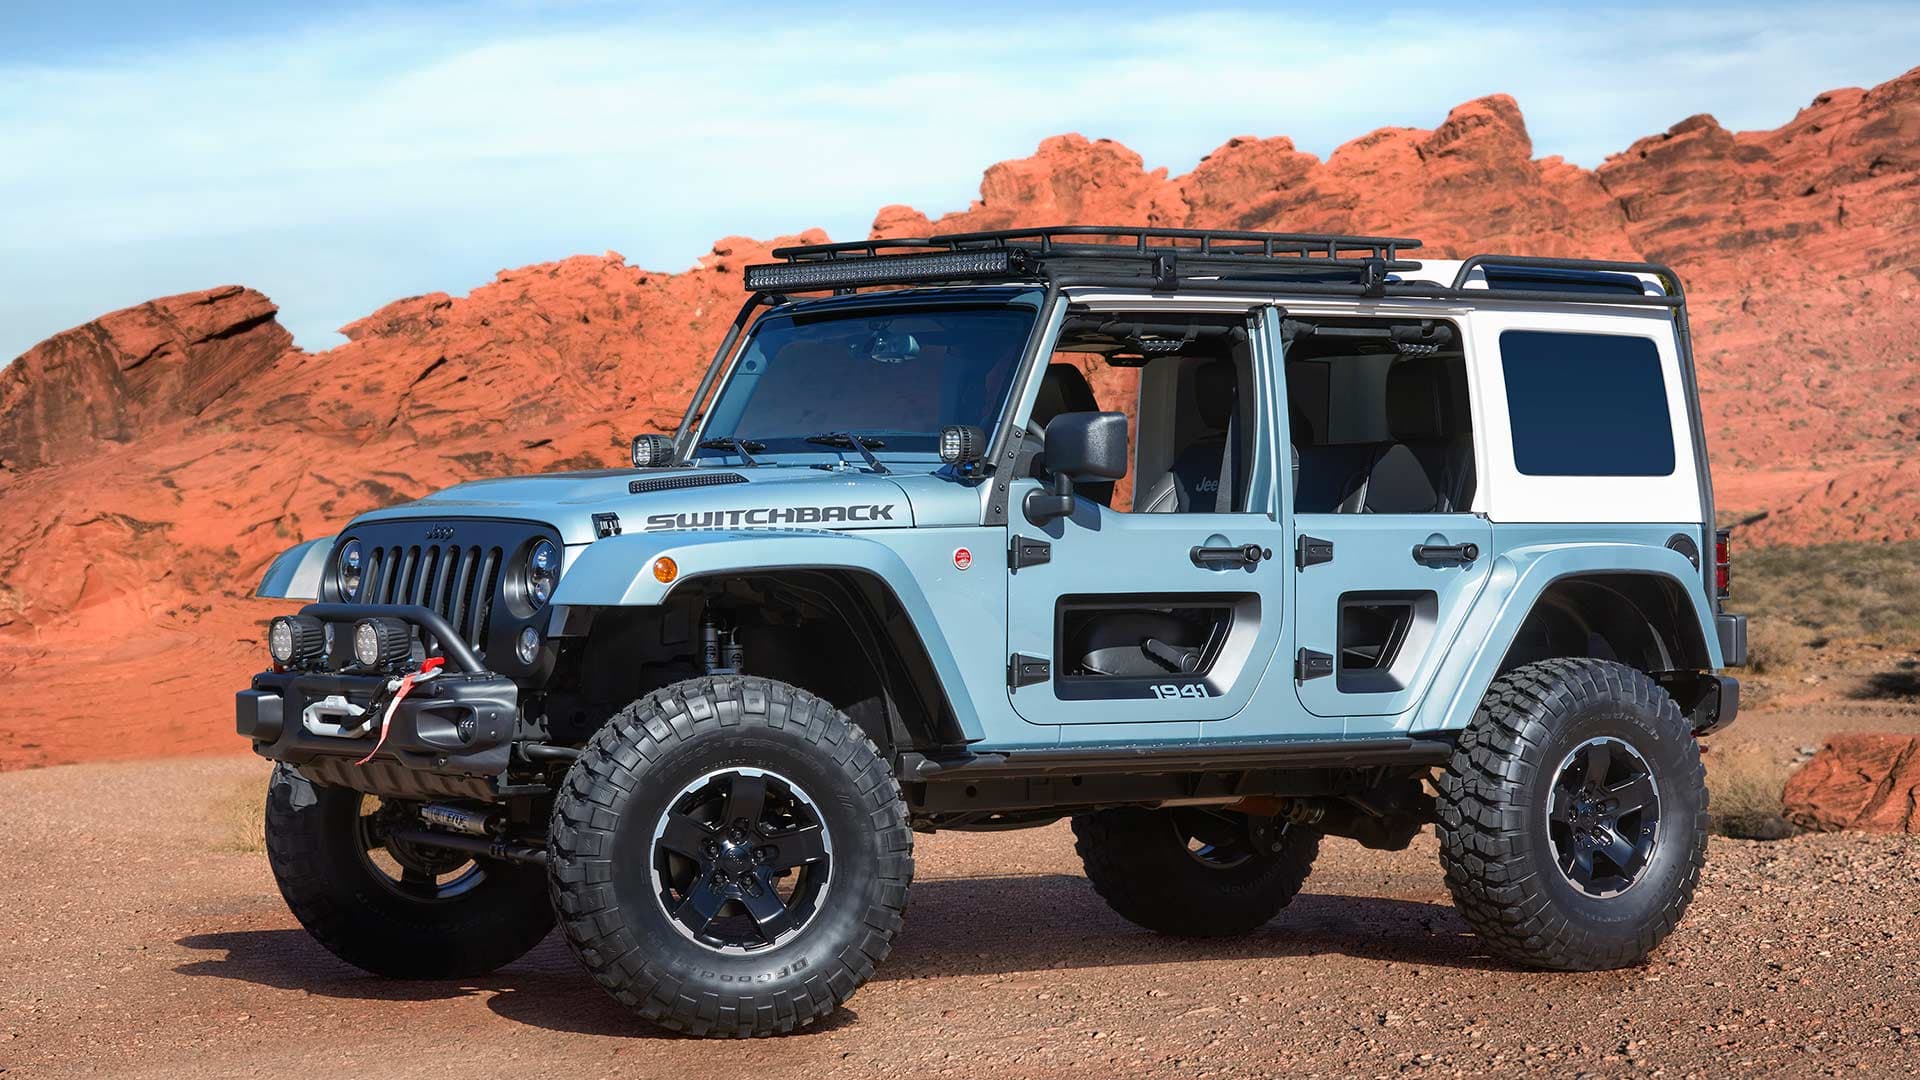 Jeep Brings 7 Outrageous Concepts to 51st Annual Moab Easter Jeep Safari